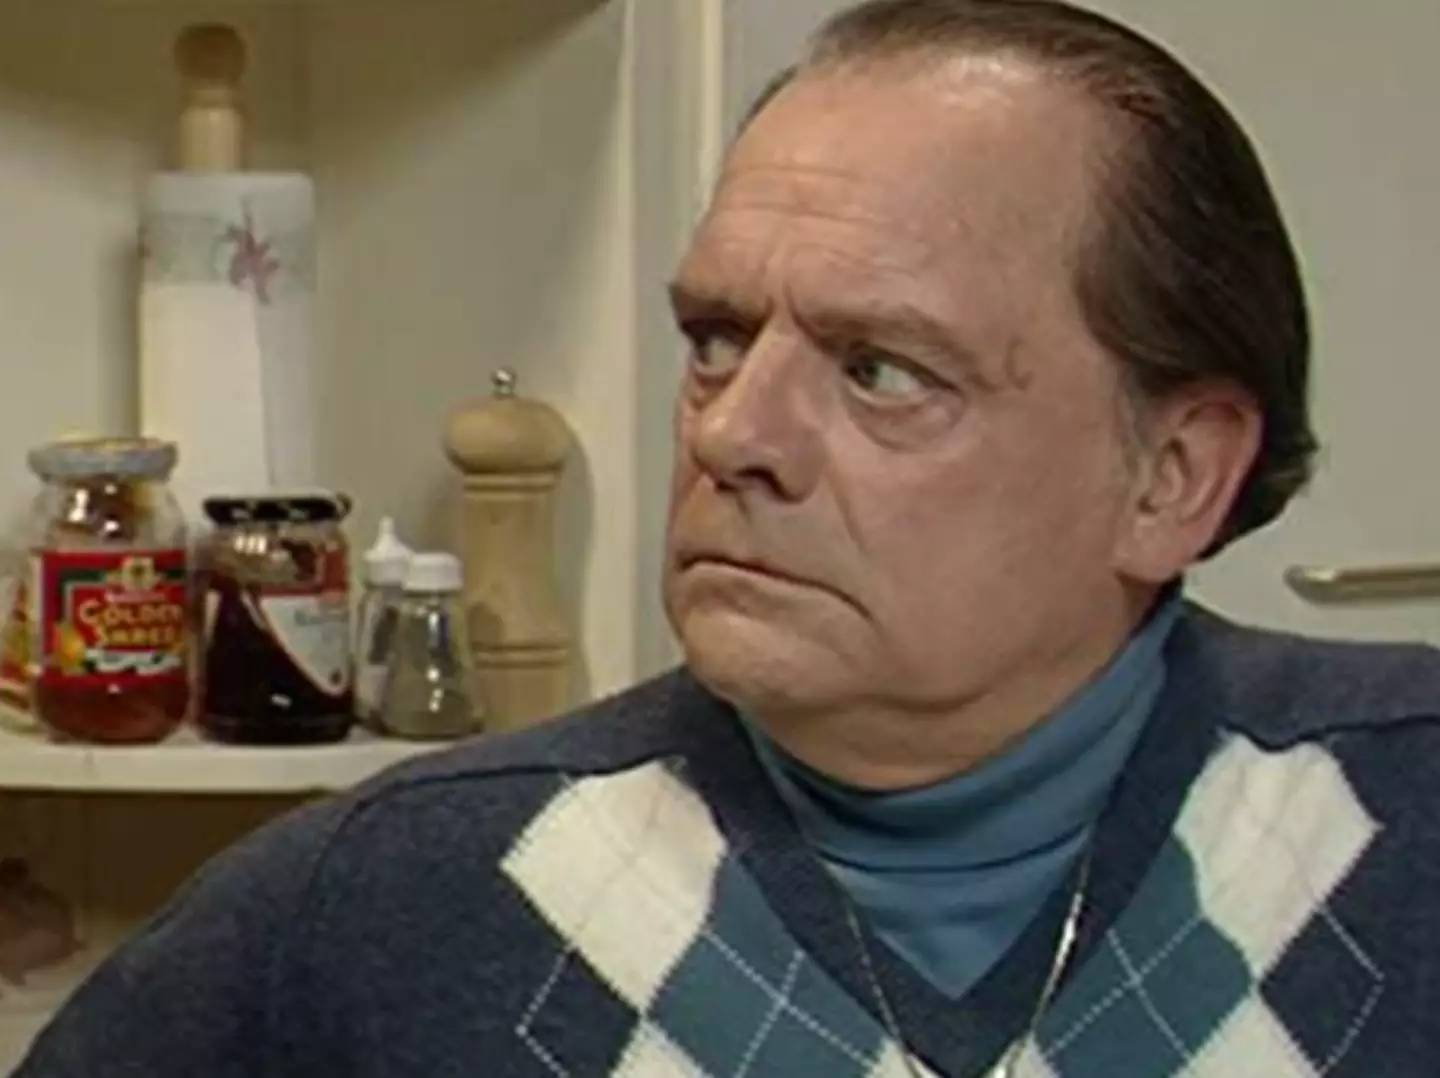 Jason starred as Del Boy for more than 20 years.